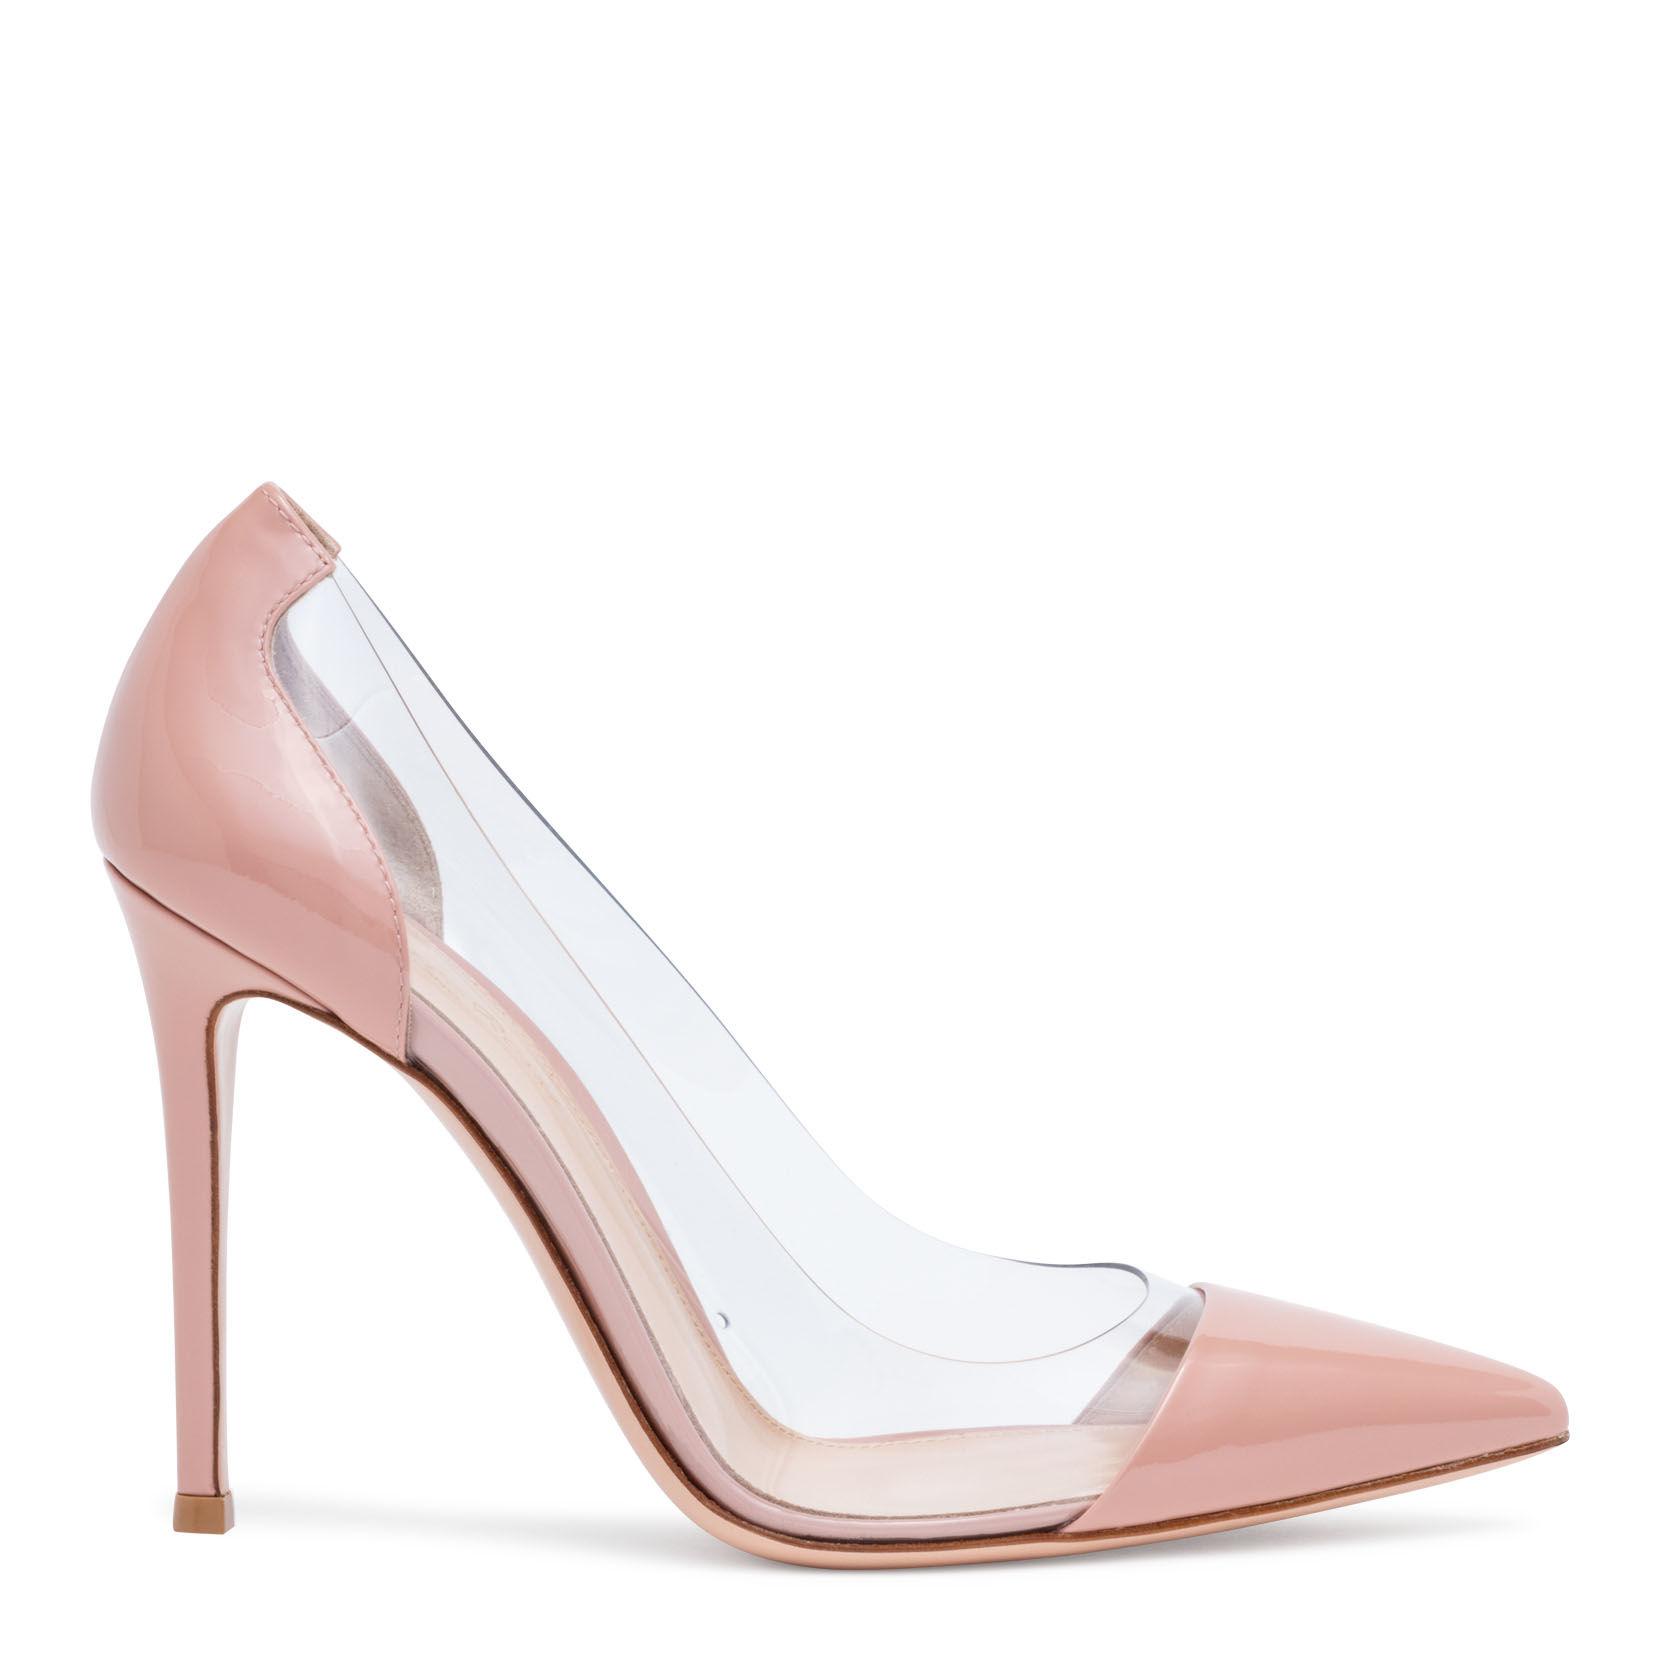 Gianvito Rossi Plexi 105 Dusty Pink Patent Leather Pumps - Lyst